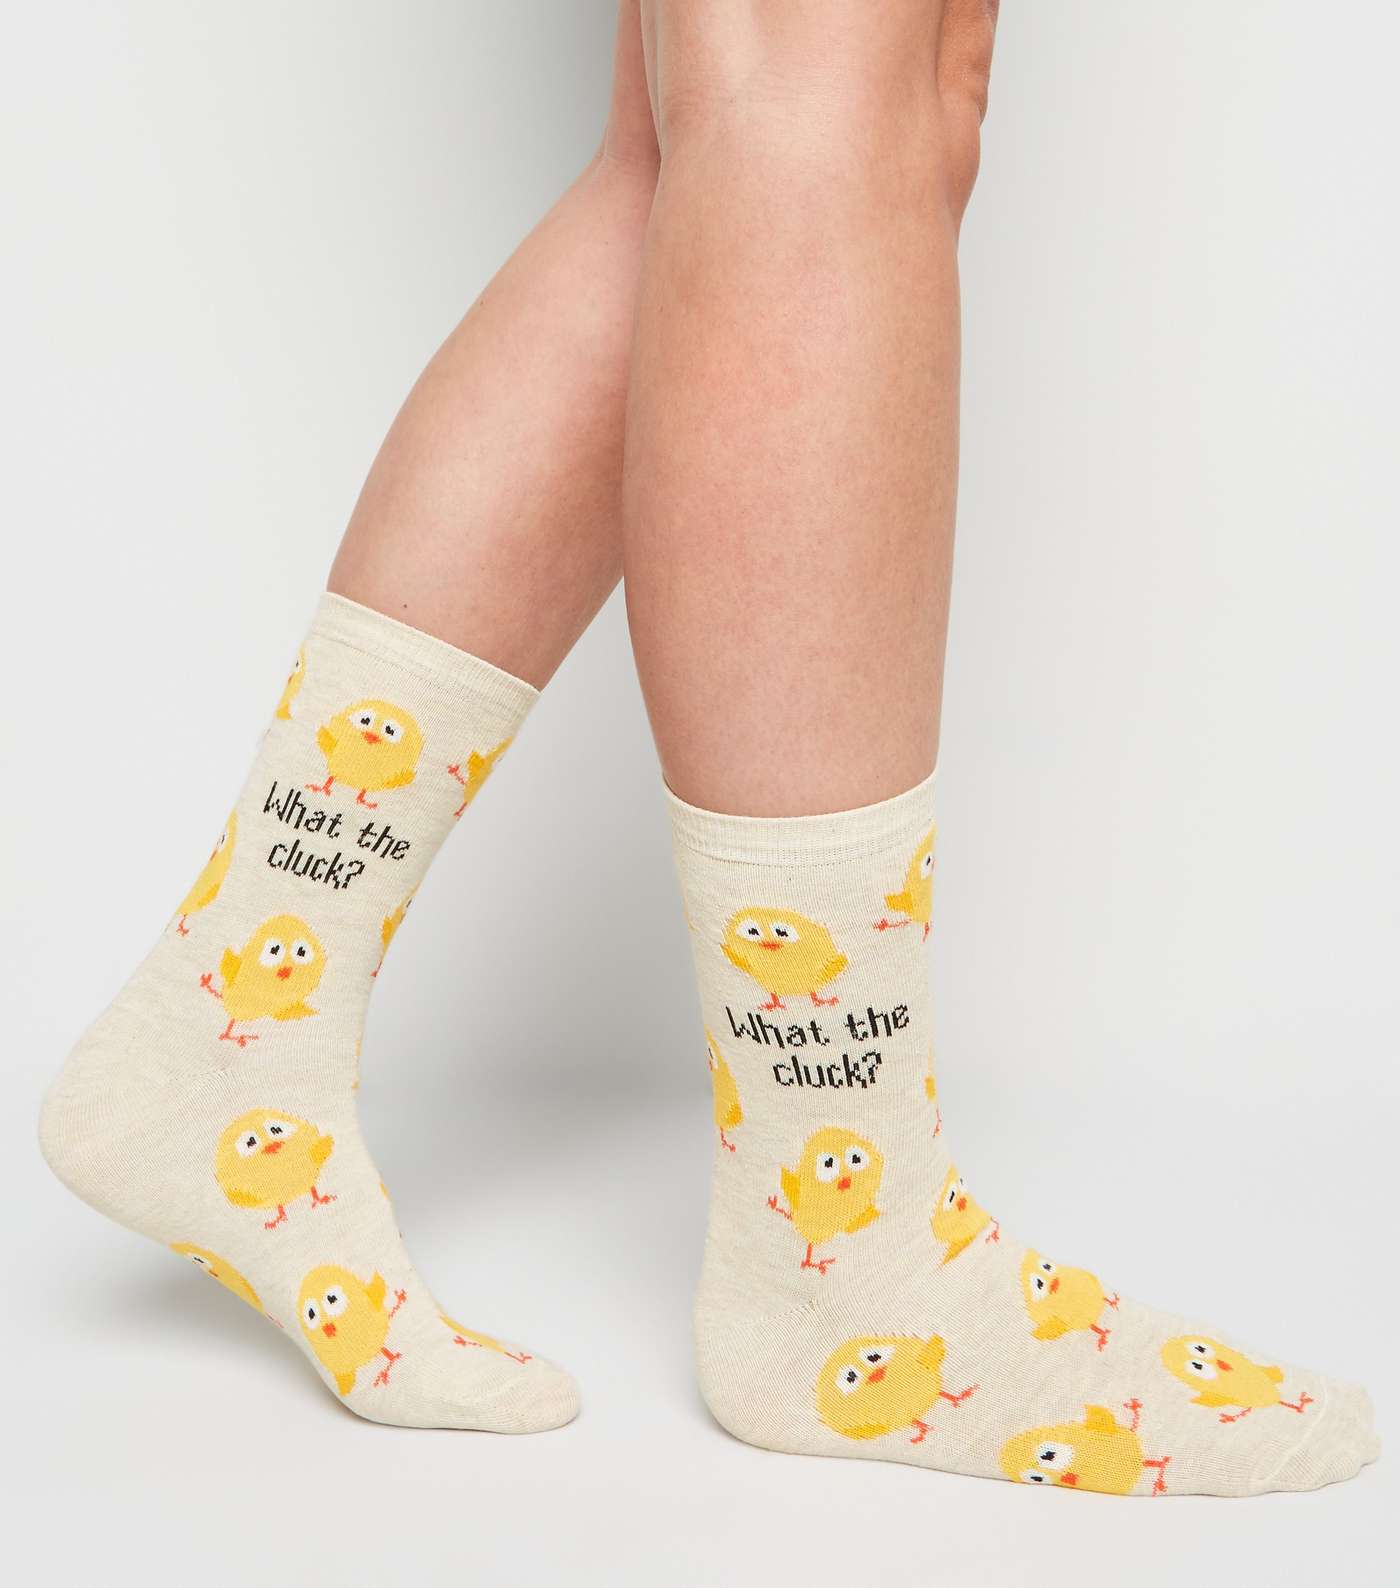 Stone Chick Print What The Cluck Slogan Socks Image 2